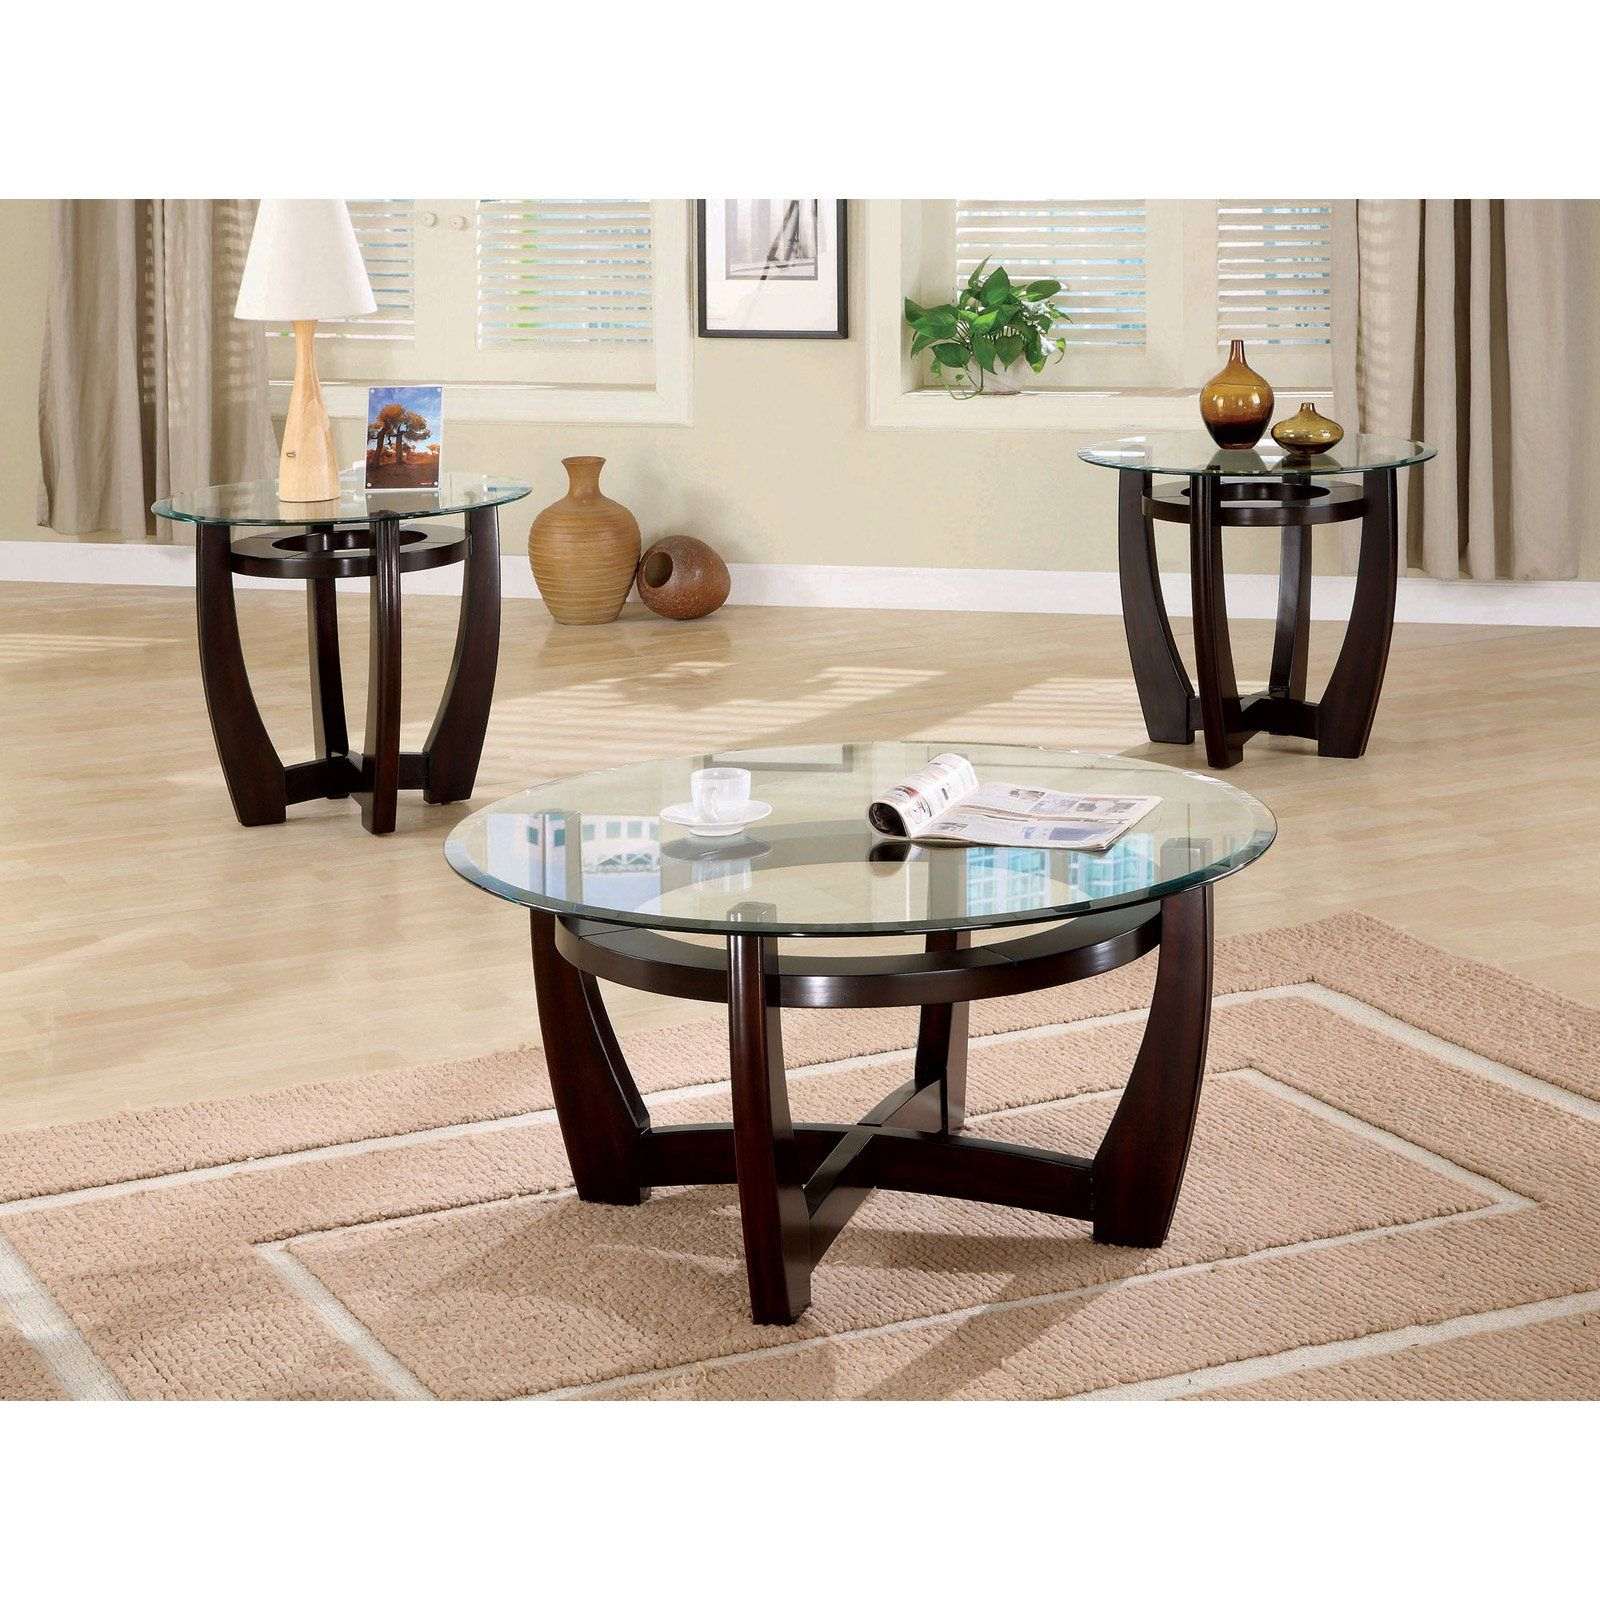 Coaster Furniture 3 Piece Glass Top Coffee Table Set 700295 in size 1600 X 1600